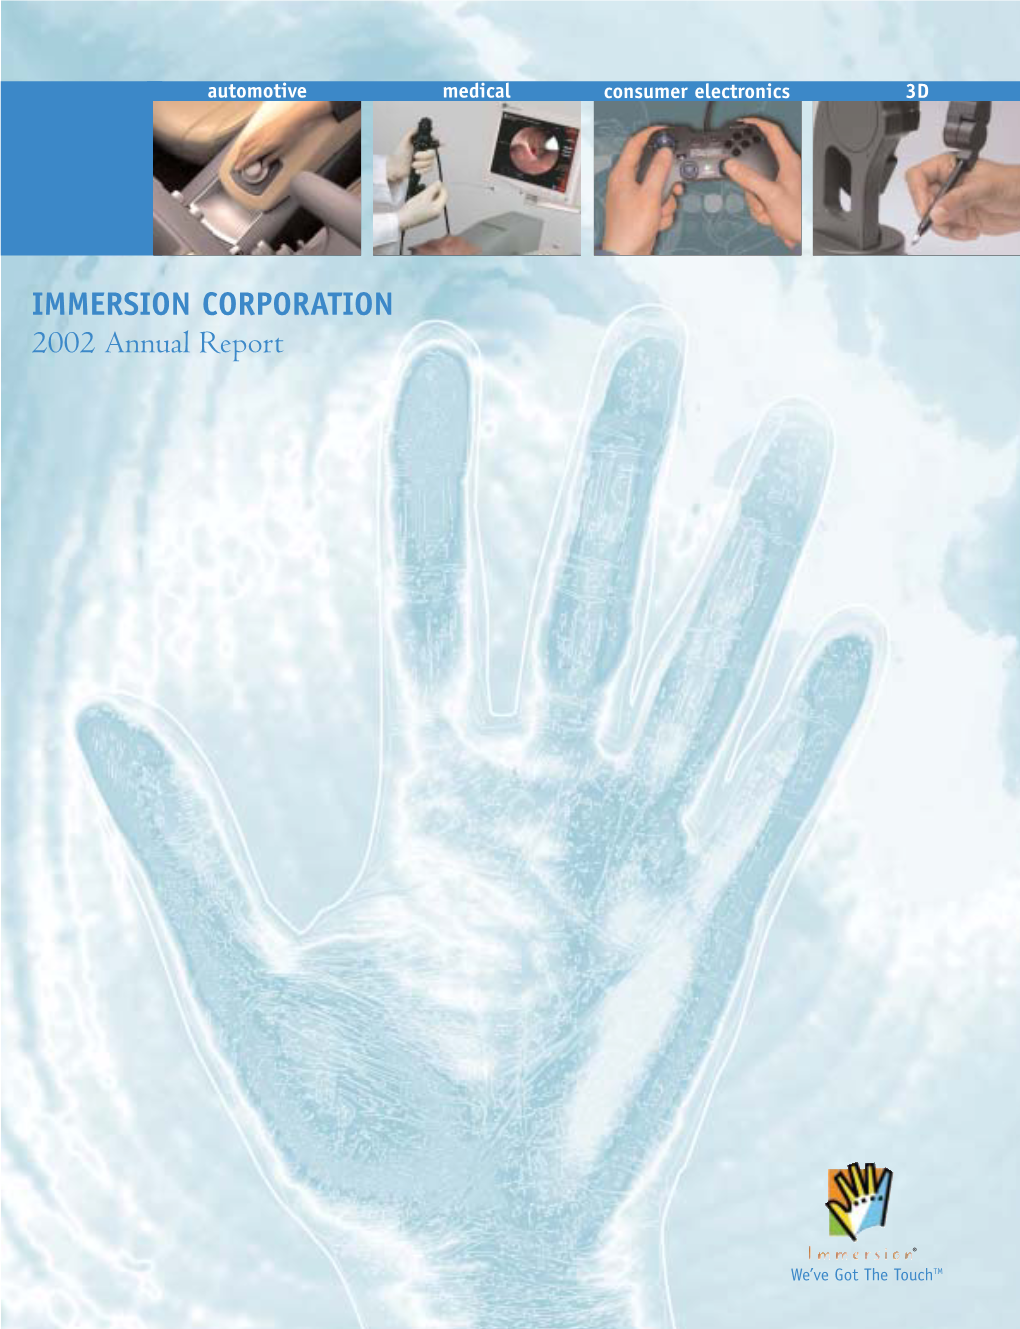 IMMERSION CORPORATION 2002 Annual Report